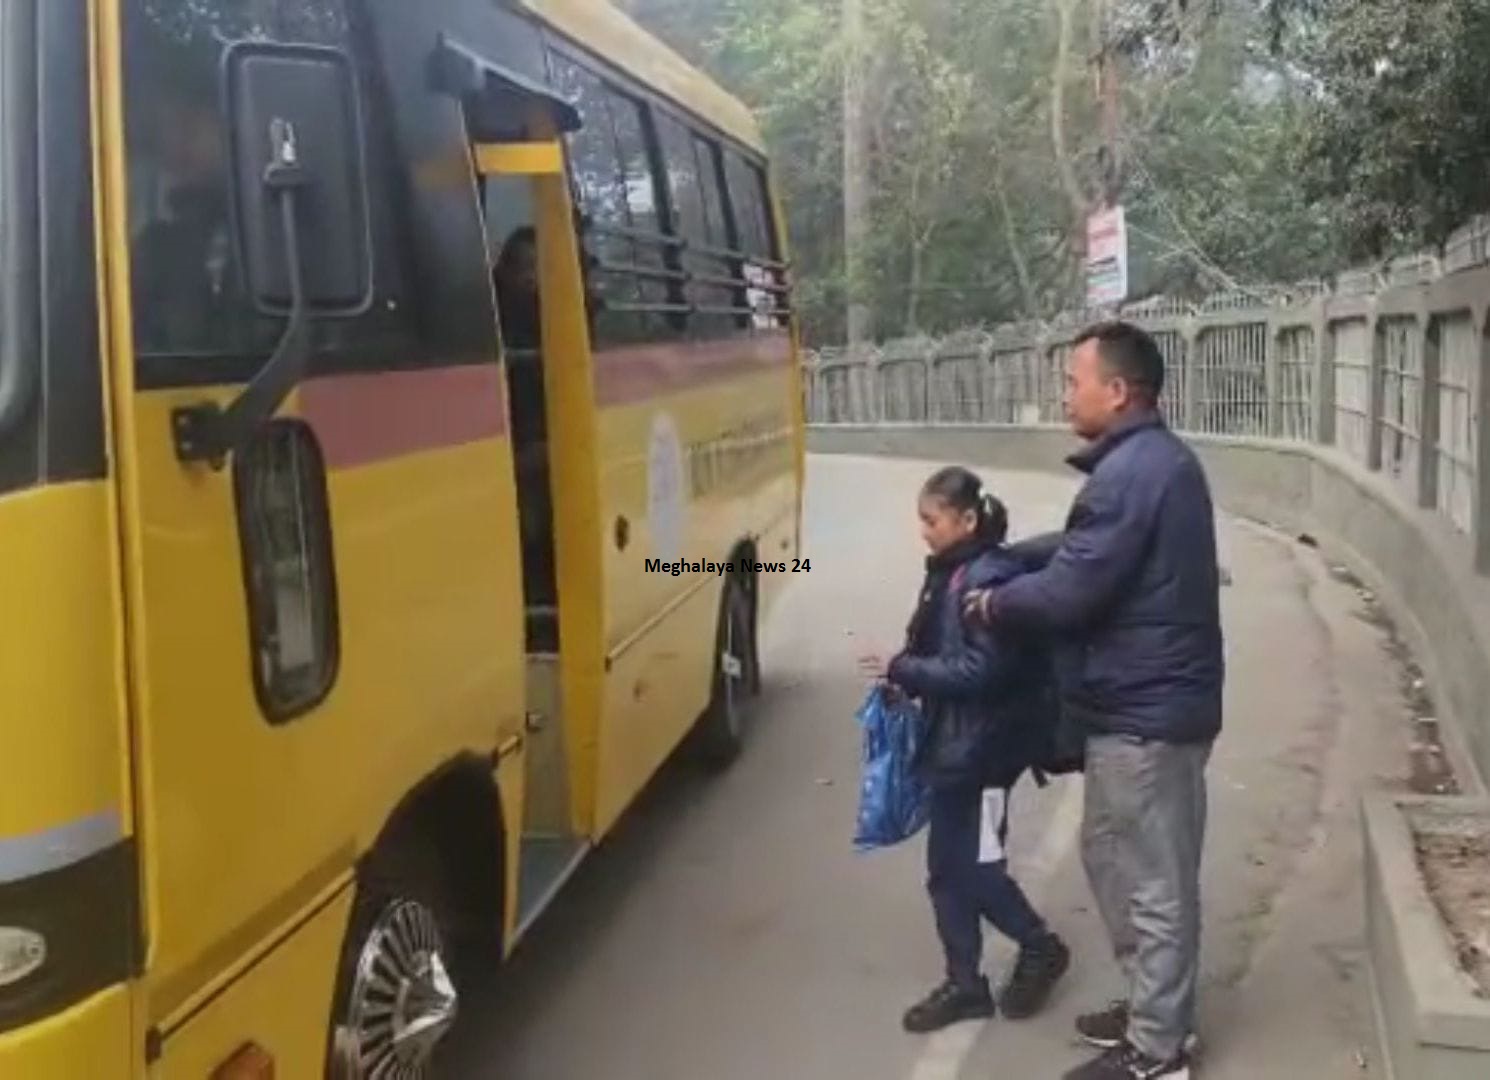 Not by private vehicle but Education Minister send his daughter to school by bus